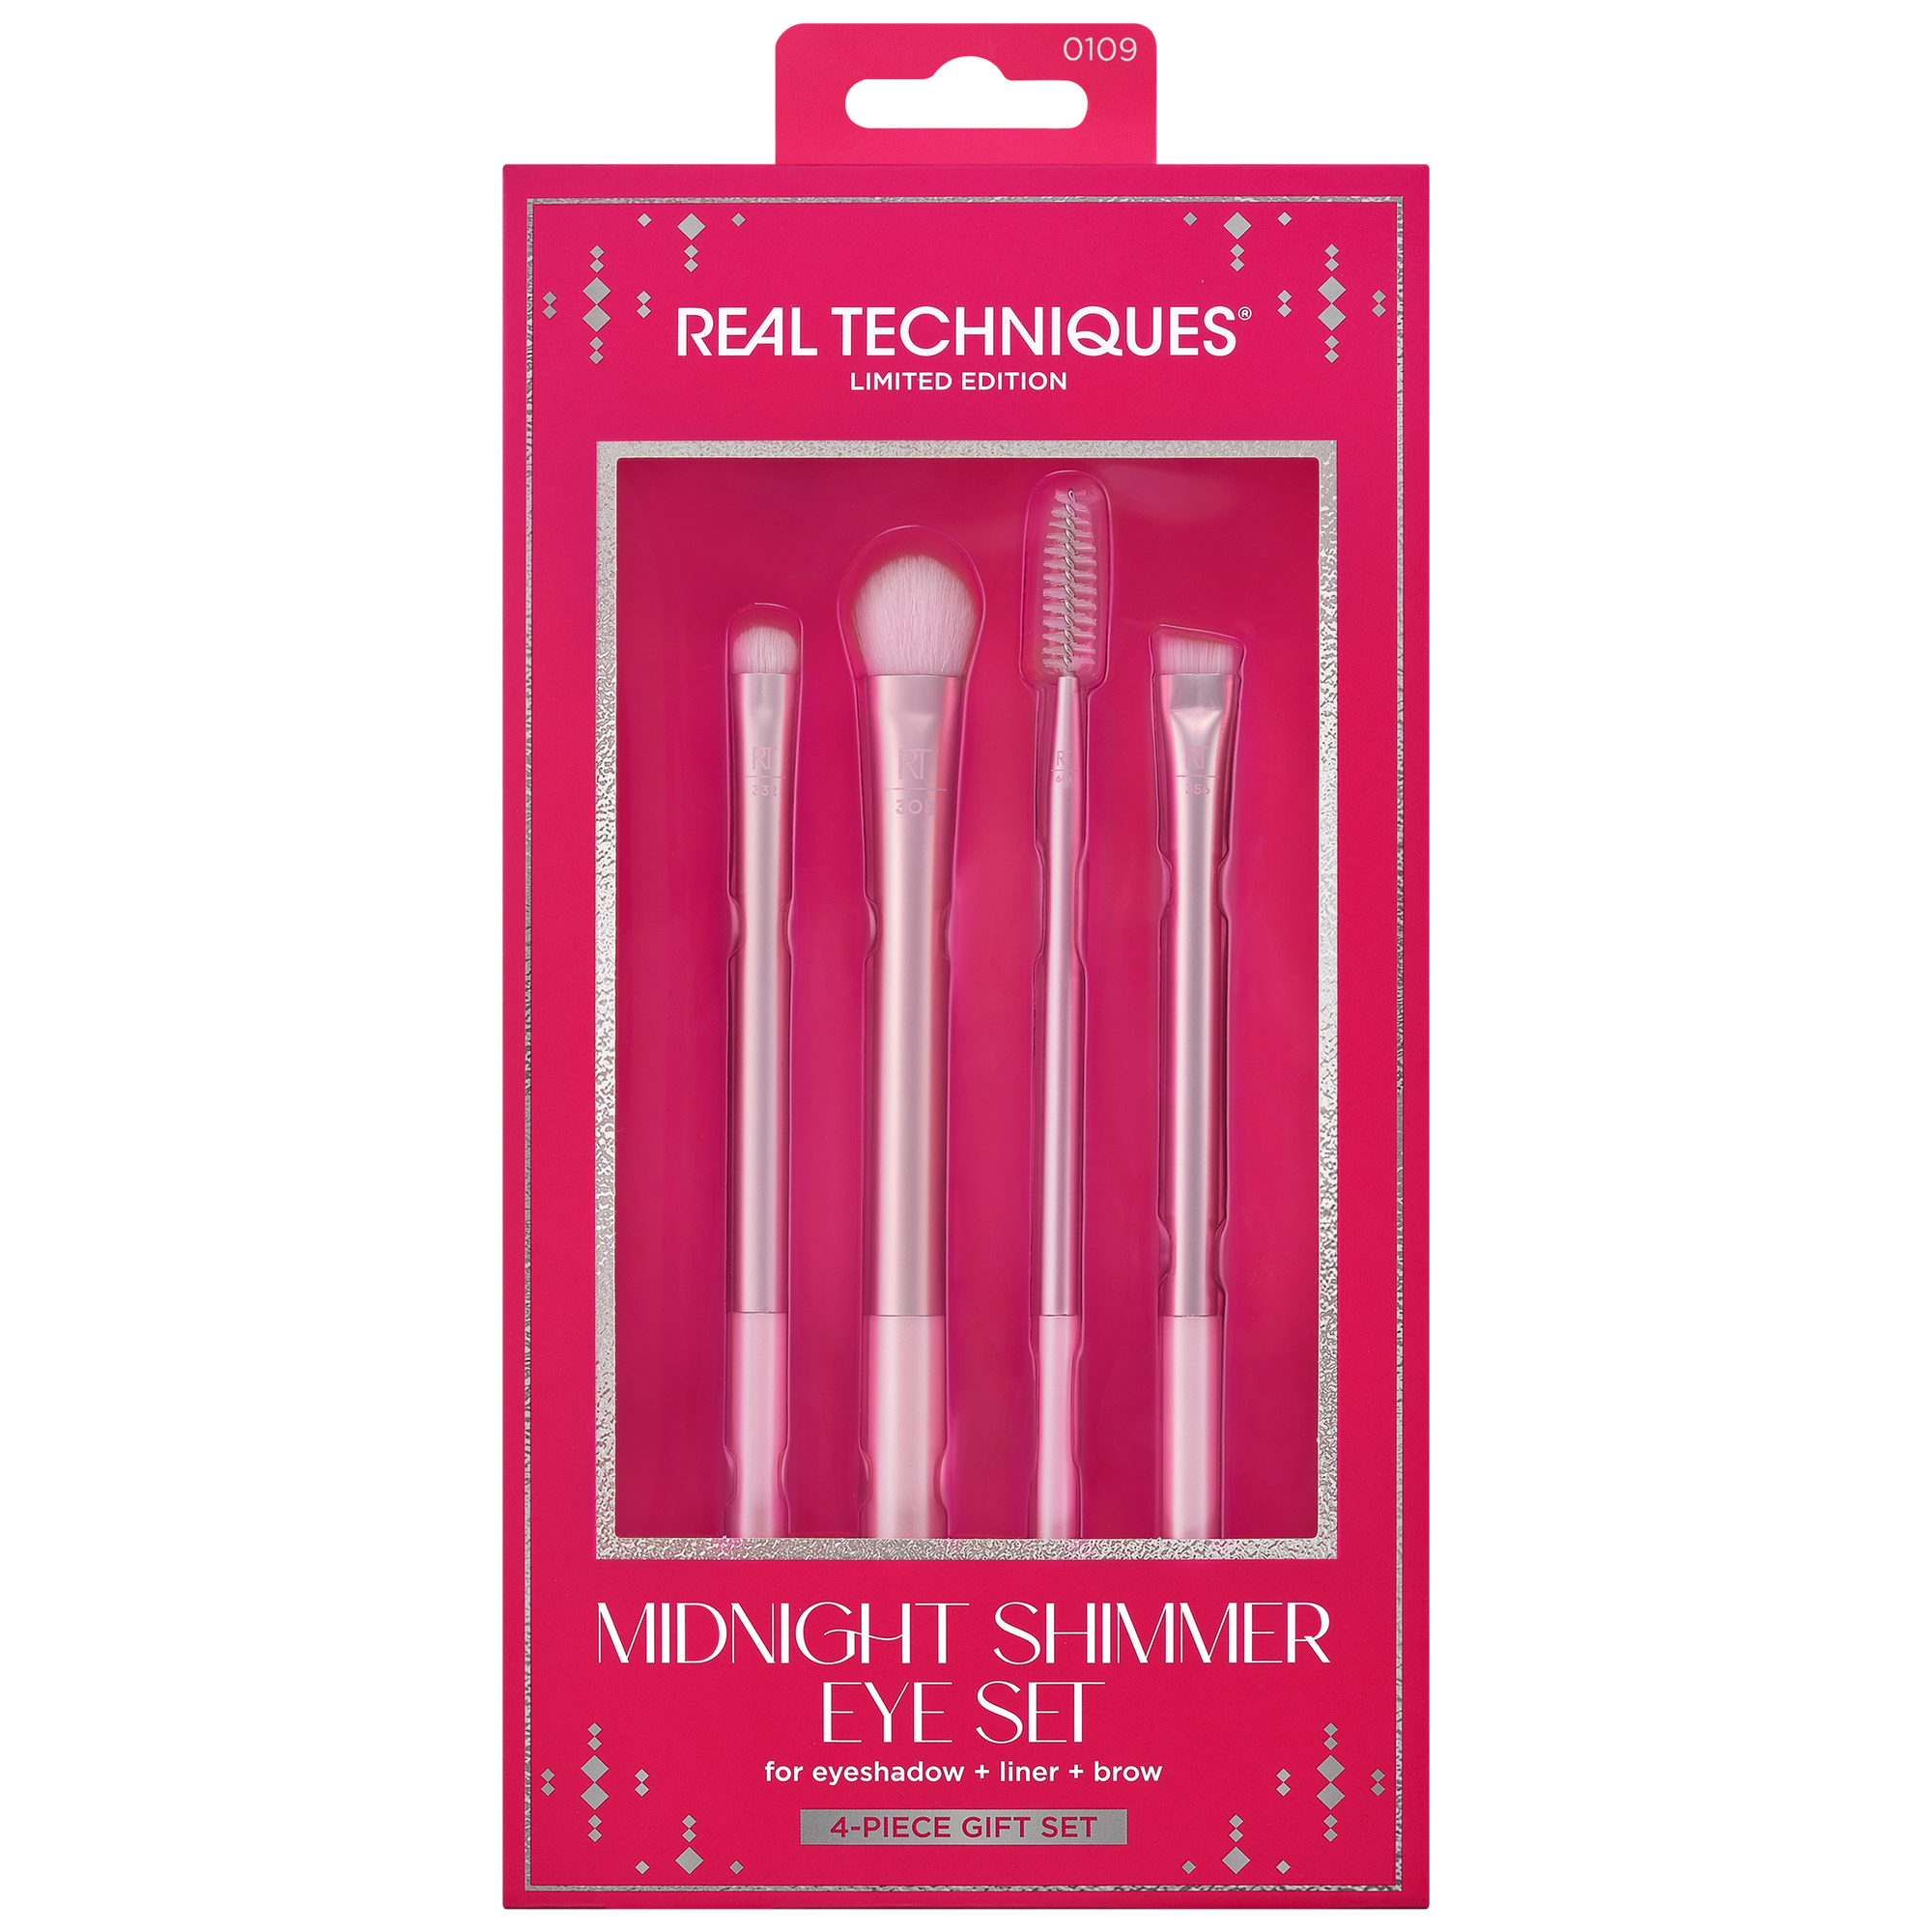 Real Techniques Midnight Shimmer Brush Set